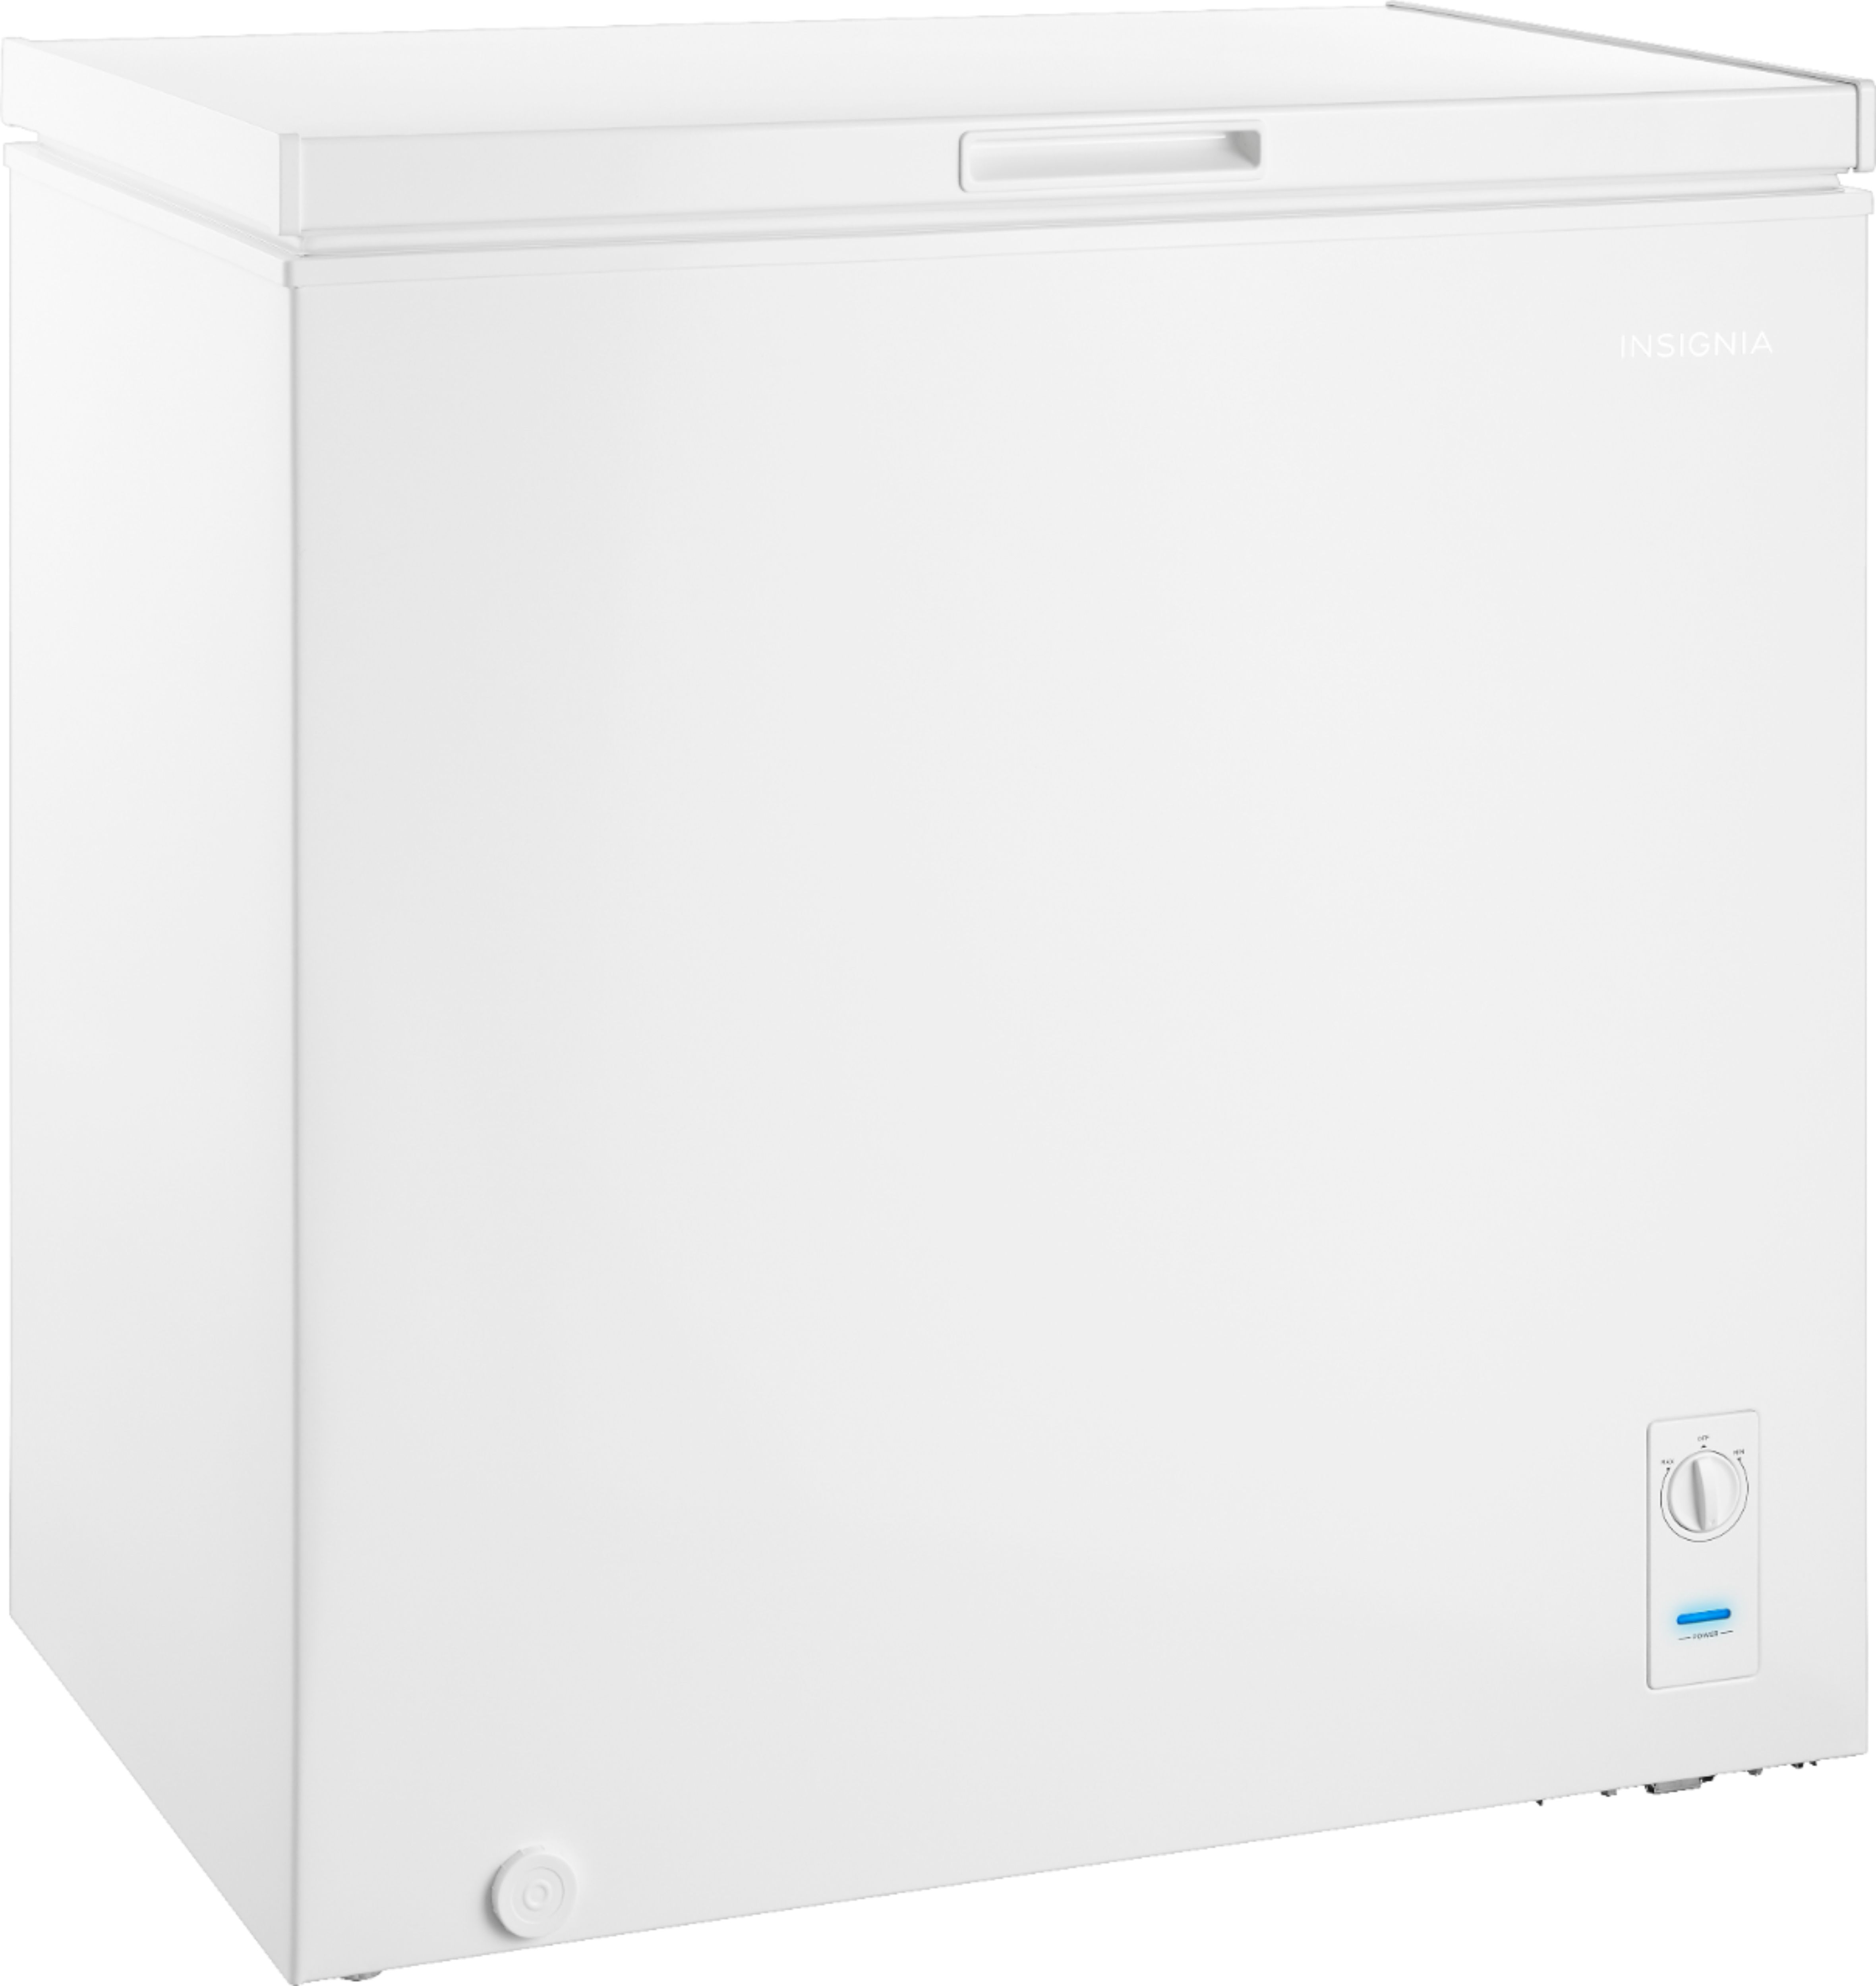 Angle View: Viking - Professional 7 Series 16.1 Cu. Ft. Upright Freezer with Interior Light - Arctic gray